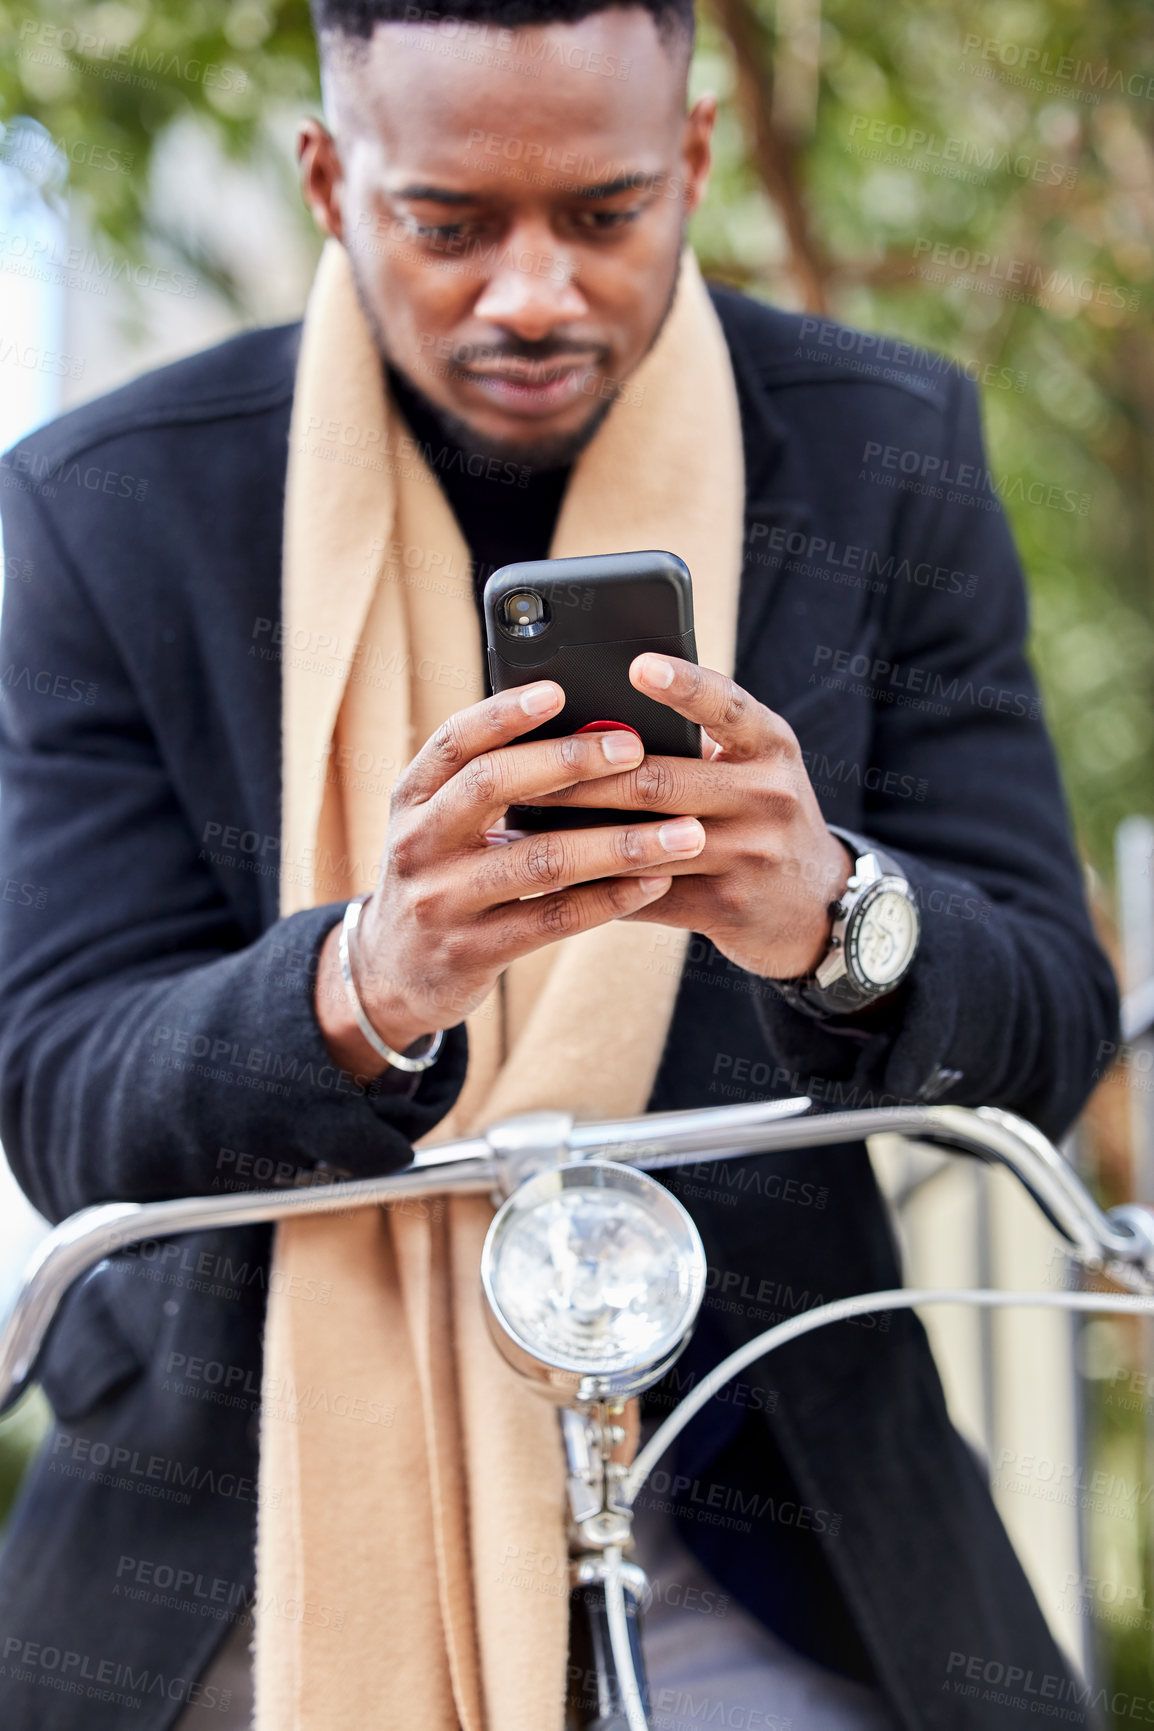 Buy stock photo Shot of a young business man using his cellphone outside